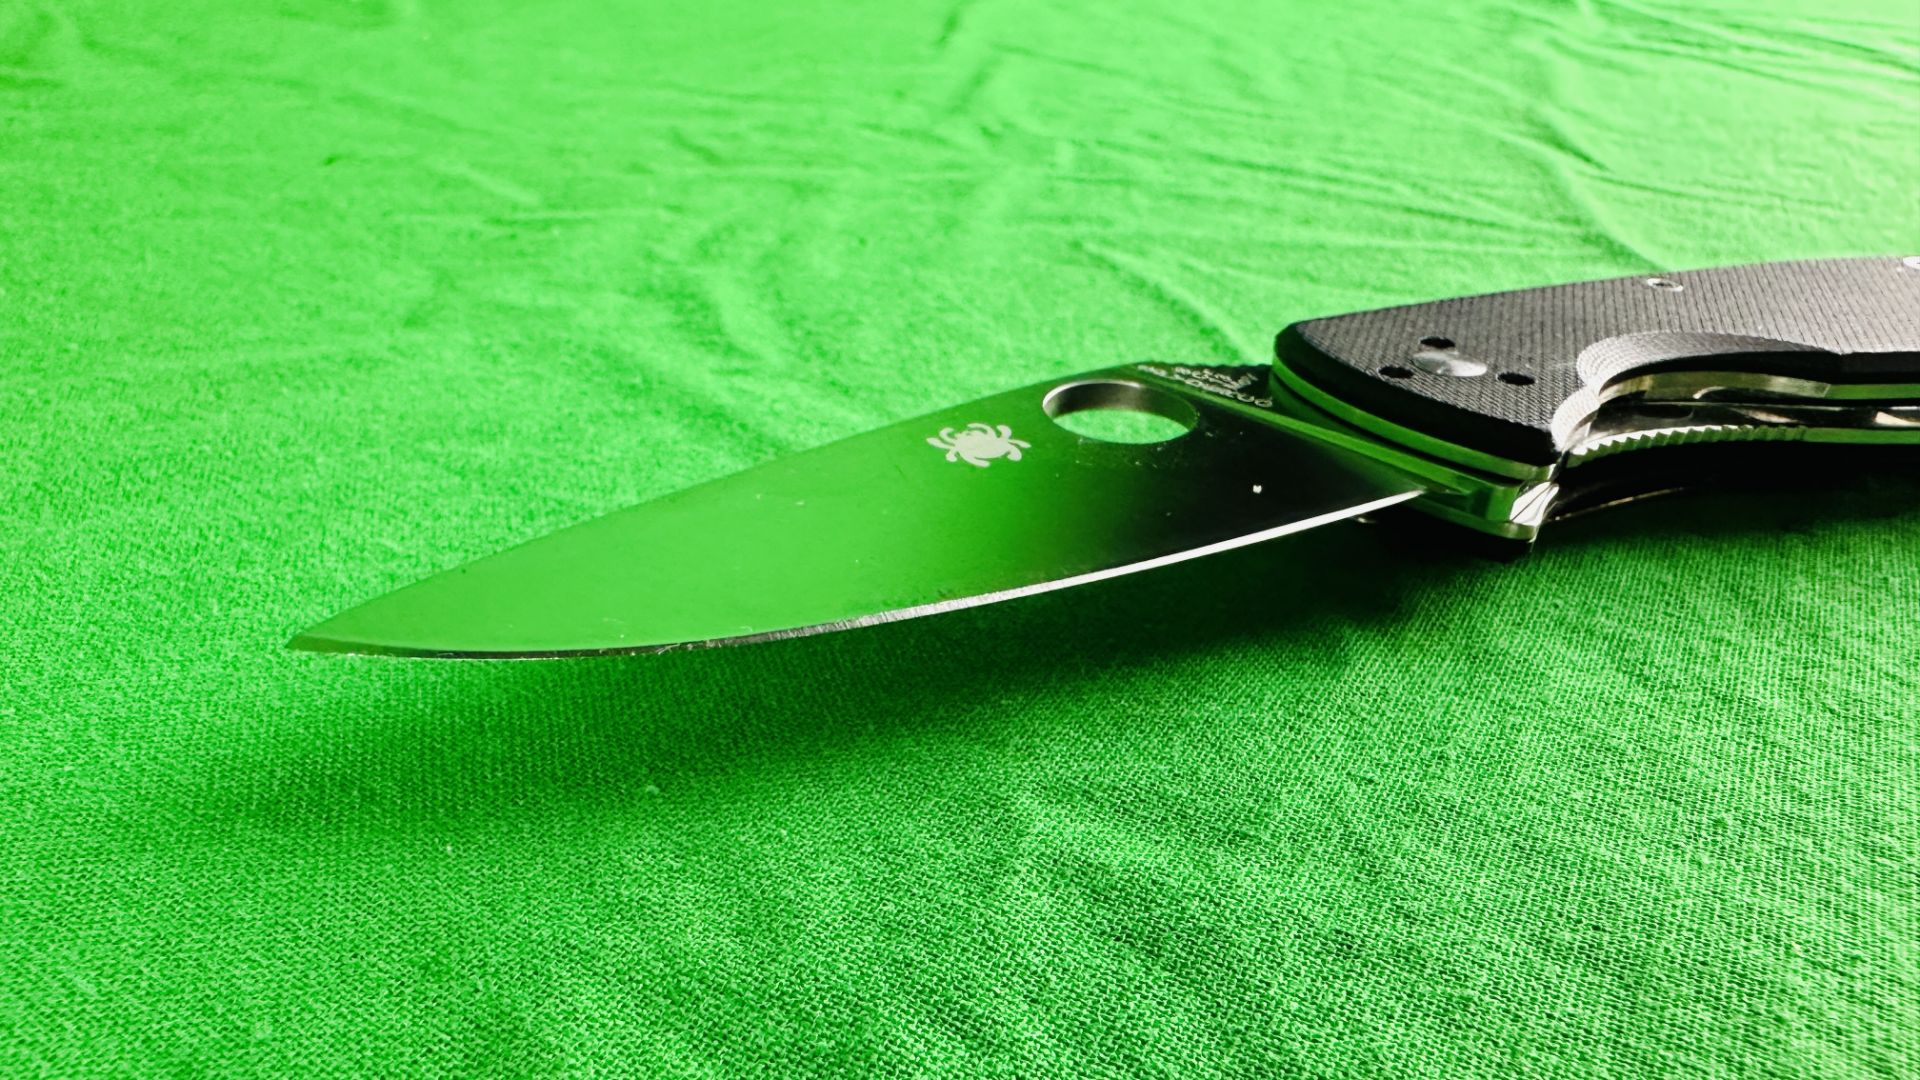 SPYDERCO TENACIOUS C122GP FOLDING POCKET LOCK KNIFE - NO POSTAGE OR PACKING AVAILABLE - Image 4 of 7